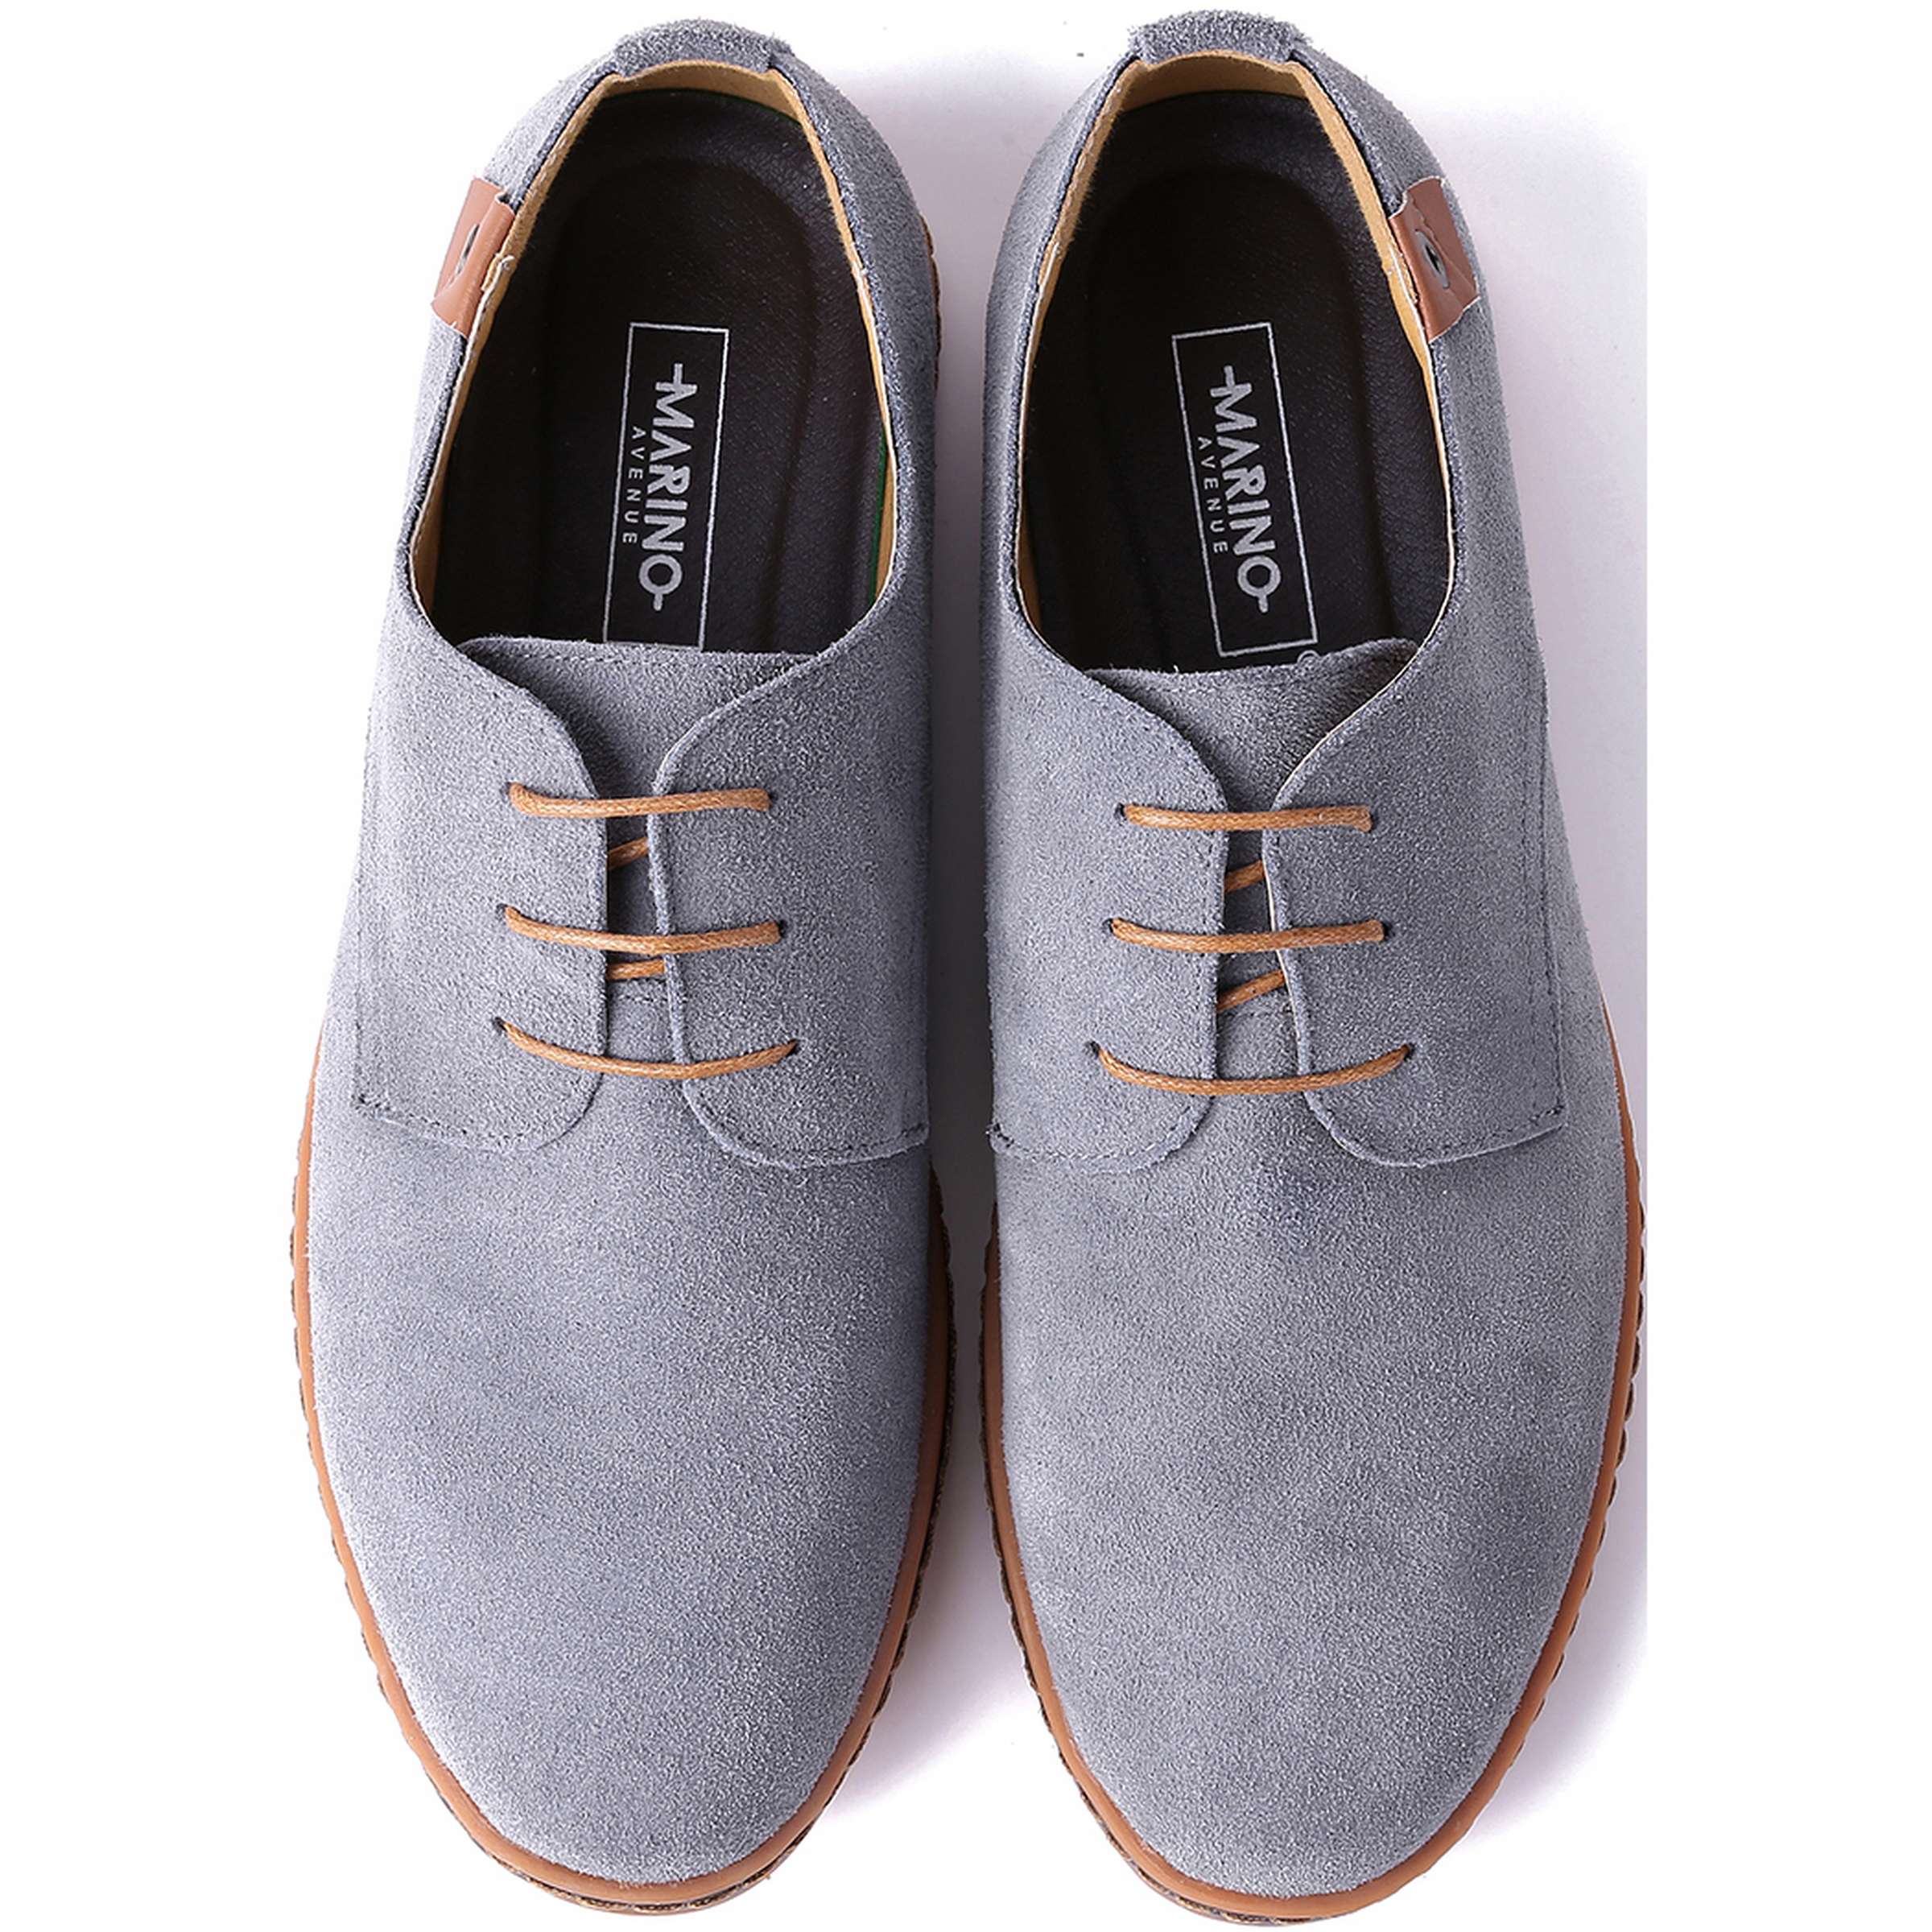 Mio Marino Classic Suede Oxford Shoes